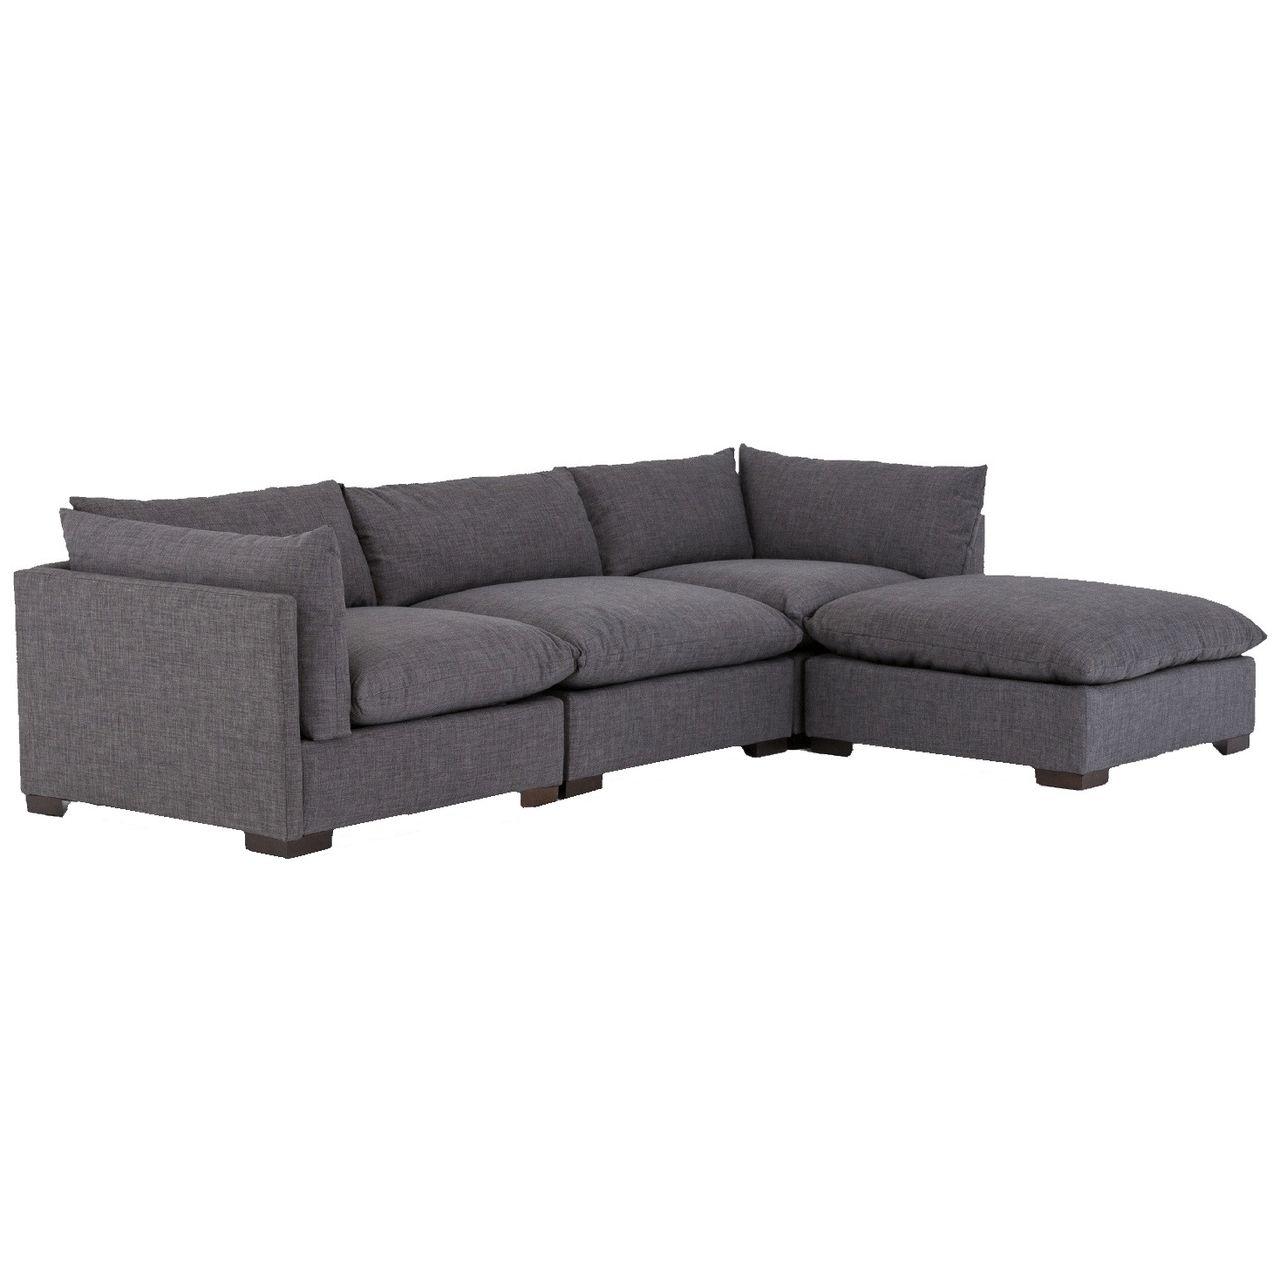 Westworld Modern Gray 4 Piece Modular Lounge Sectional Inside 2pc Burland Contemporary Sectional Sofas Charcoal (Photo 6 of 15)